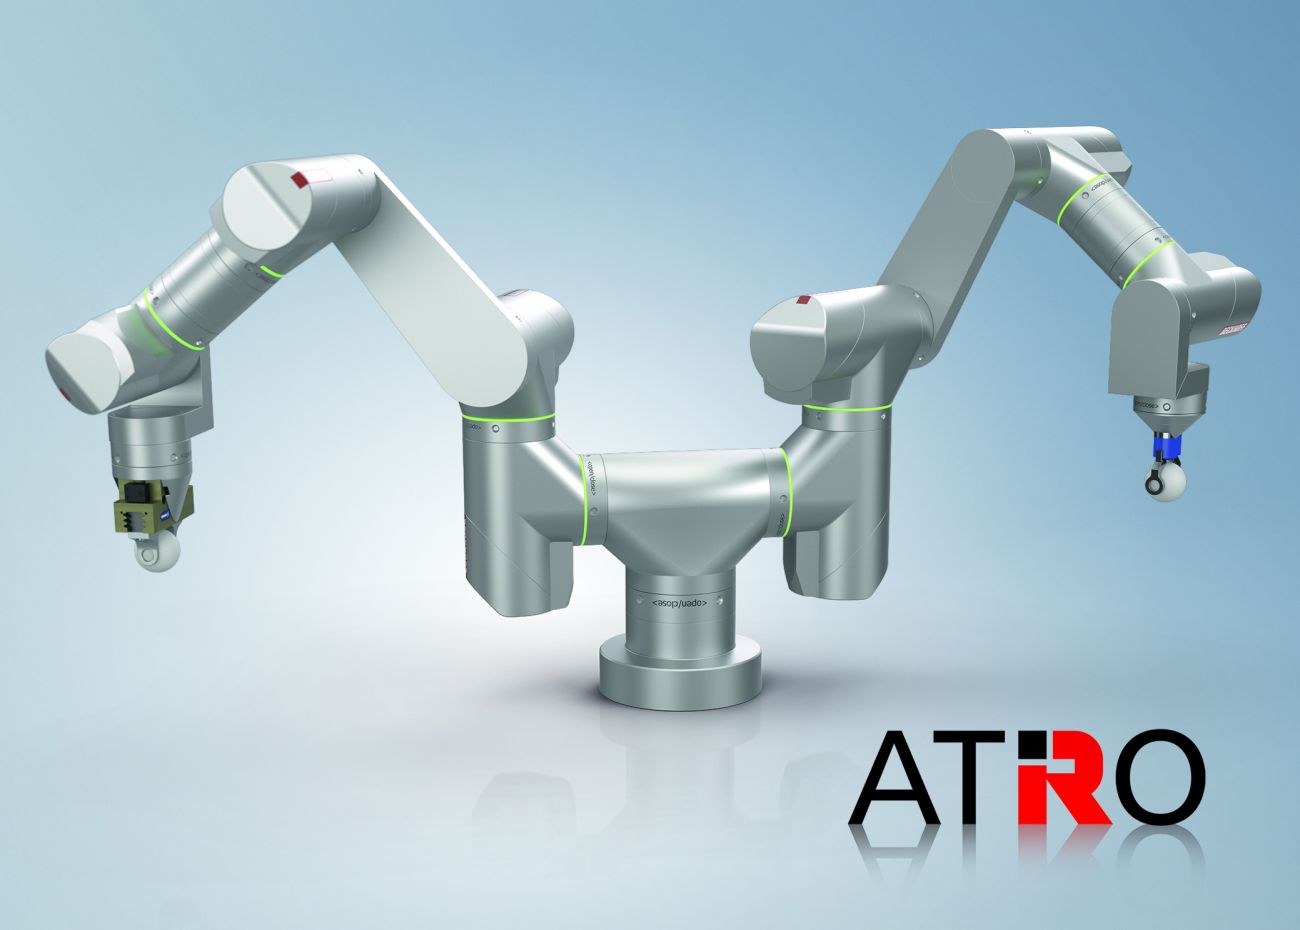 The new link modules allow ATRO kinematics to be set up even more flexibly – all the way through to multi-arm robots.